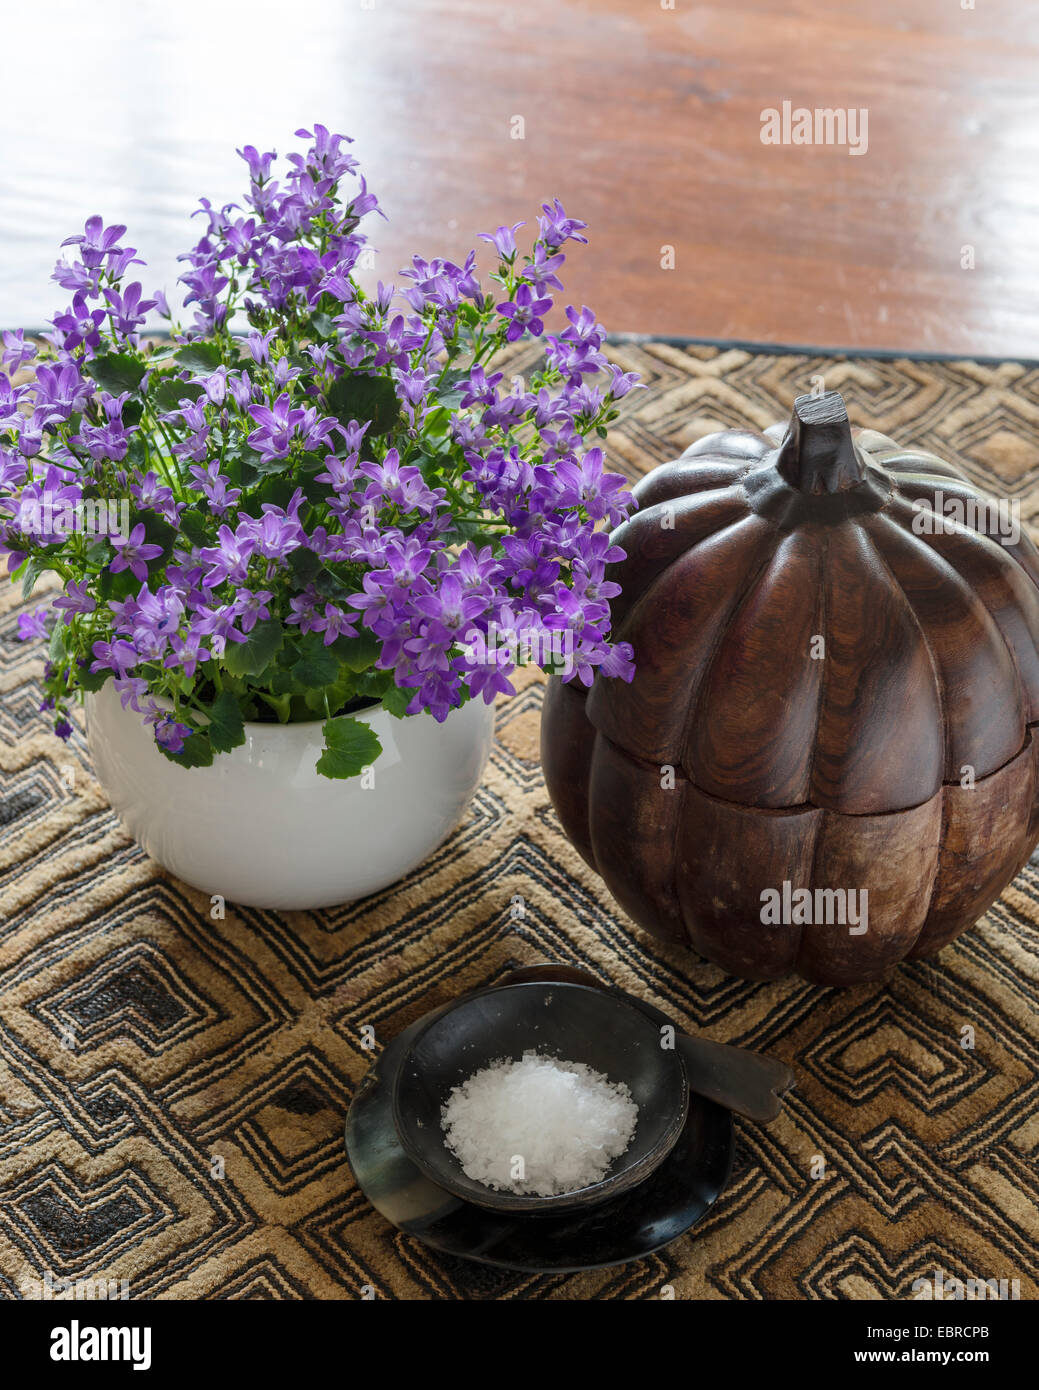 Purple flowering plant and salt dish with wooden carved pumpkin Stock Photo